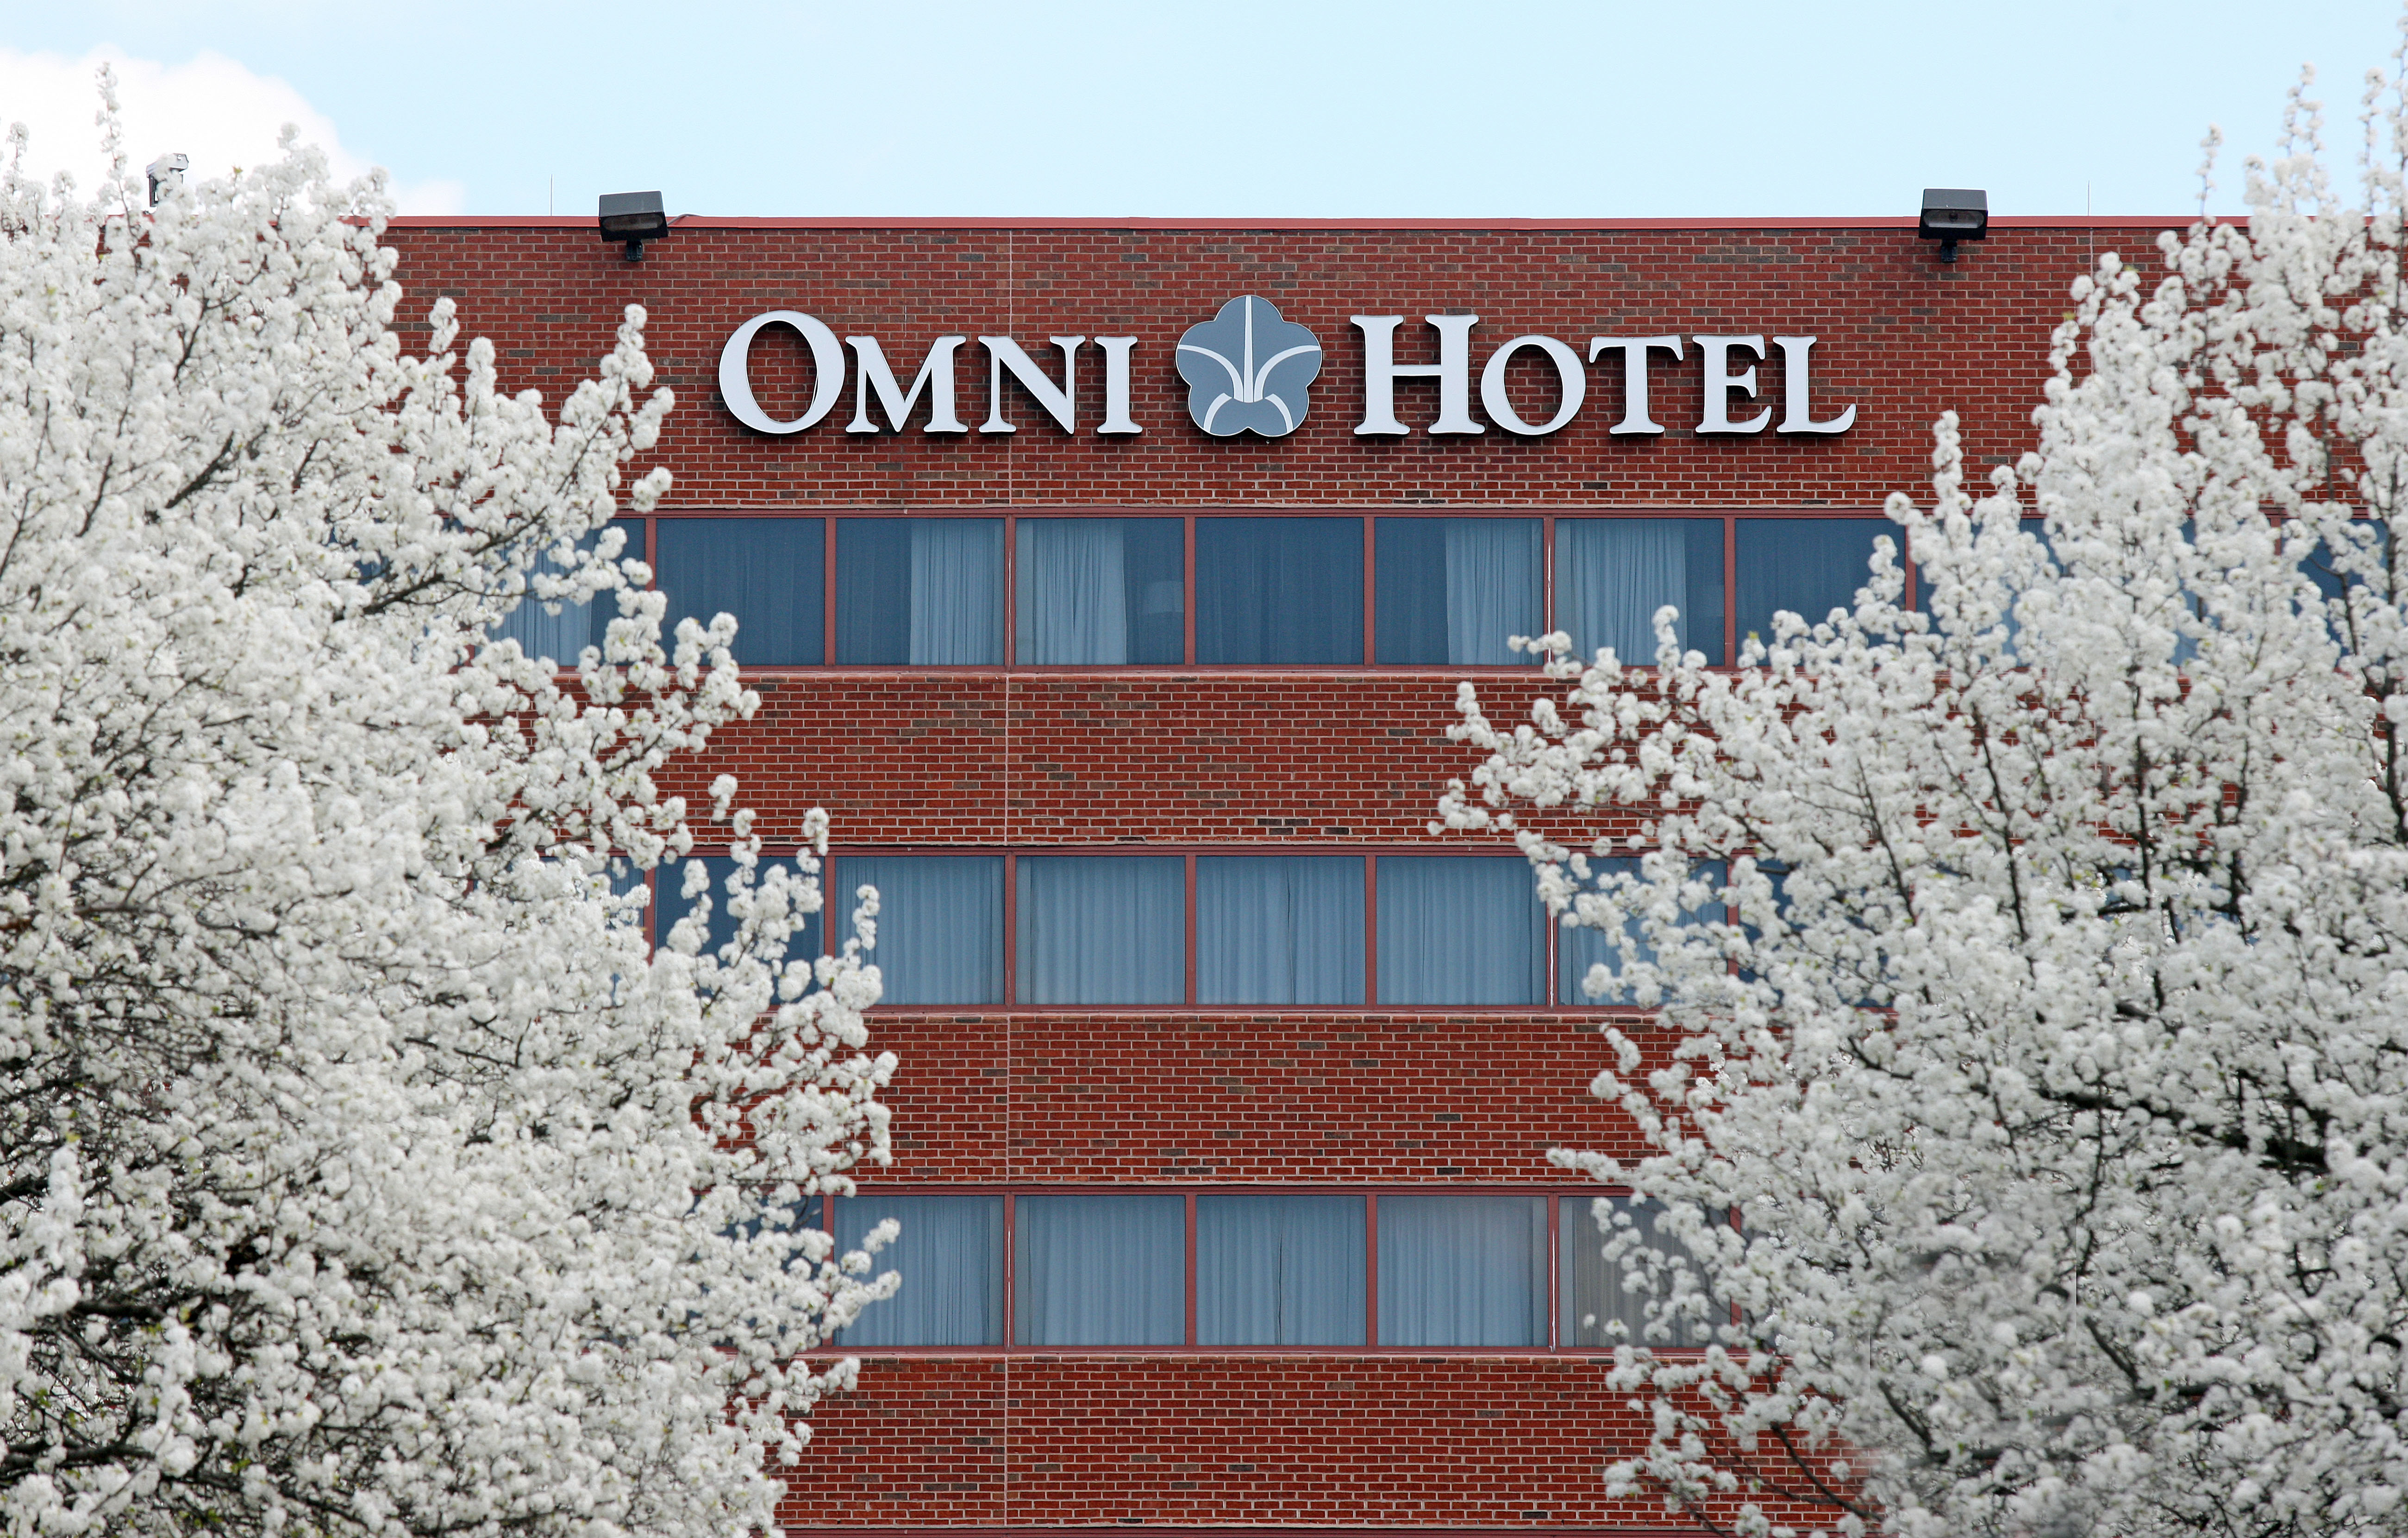 From Dark Reading – Omni Hotel IT Outage Disrupts Reservations, Digital Key Systems